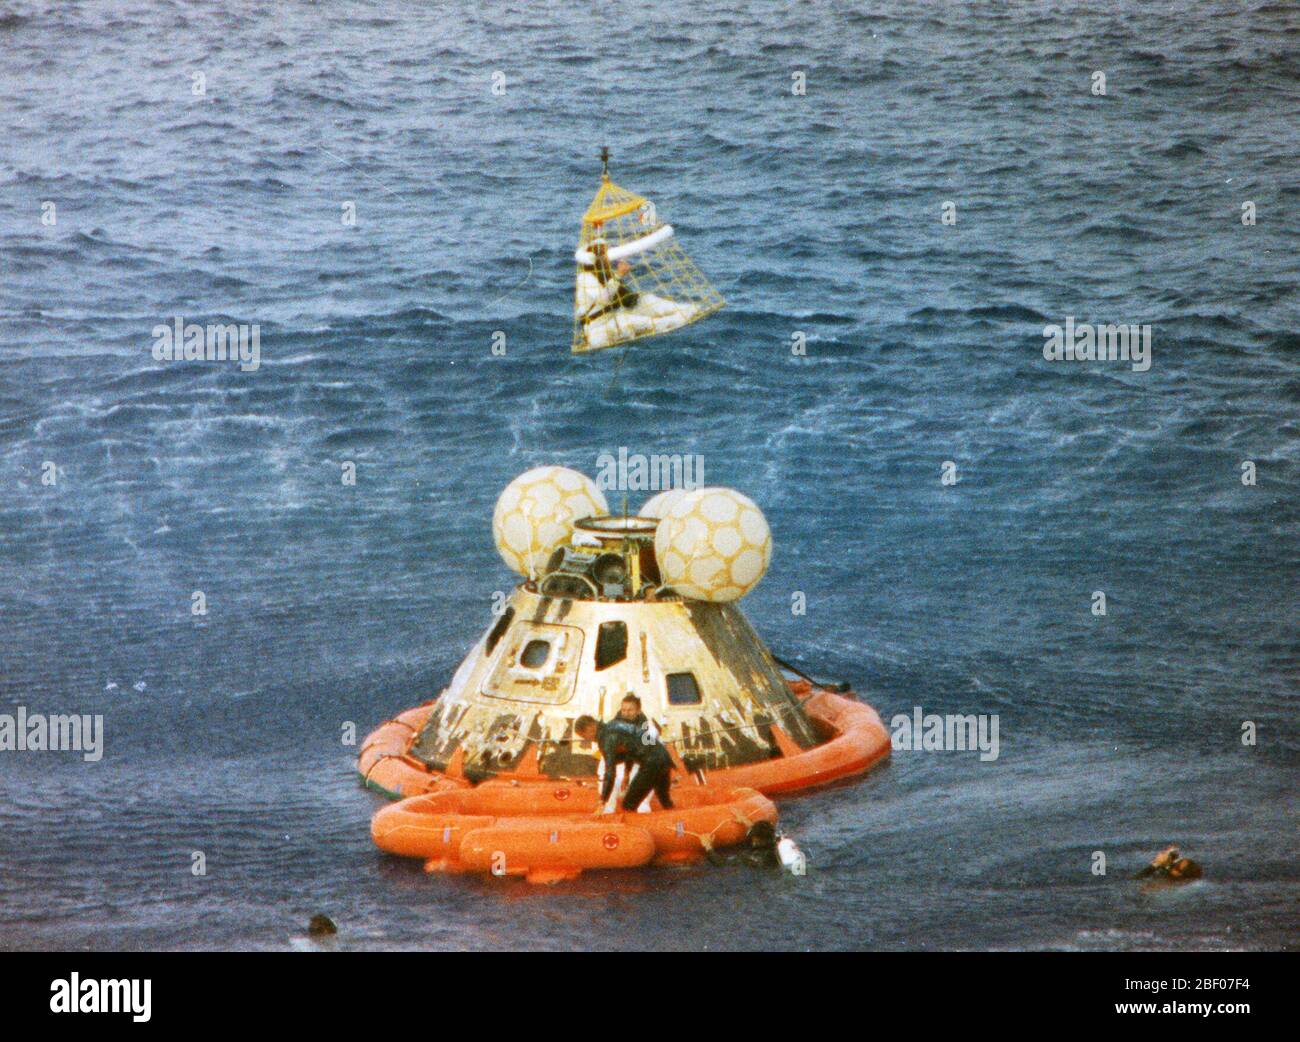 Astronaut John L. Swigert Jr., command module pilot, is lifted aboard a helicopter in a Billy Pugh helicopter rescue net while astronaut James A. Lovell Jr., commander, awaits his turn. The crew was taken to the U.S.S. Iwo Jima, prime recovery ship, several minutes after the Apollo 13 spacecraft splashed down at 12:01:44 pm CST on April 17, 1970. Stock Photo